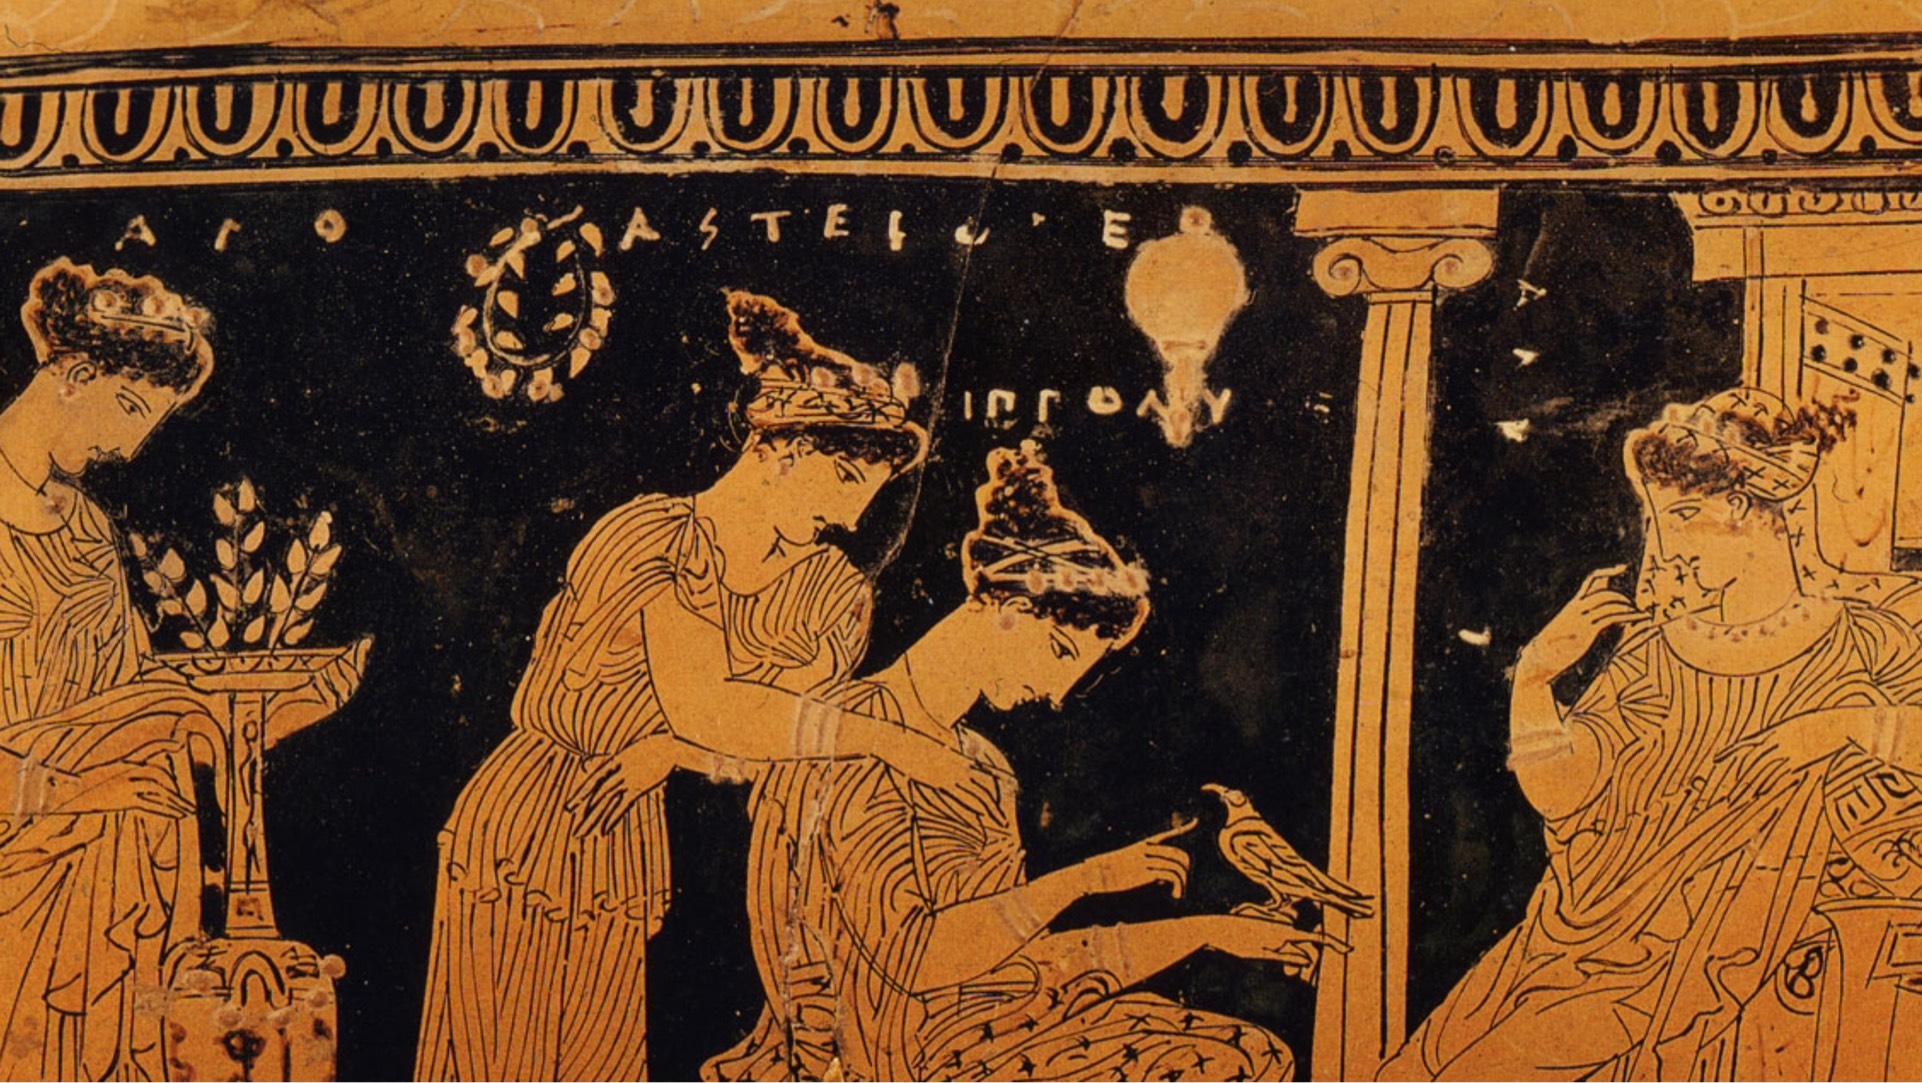 Women Of Ancient Greece Screen 3 On Flowvella Presentation Software For Mac Ipad And Iphone